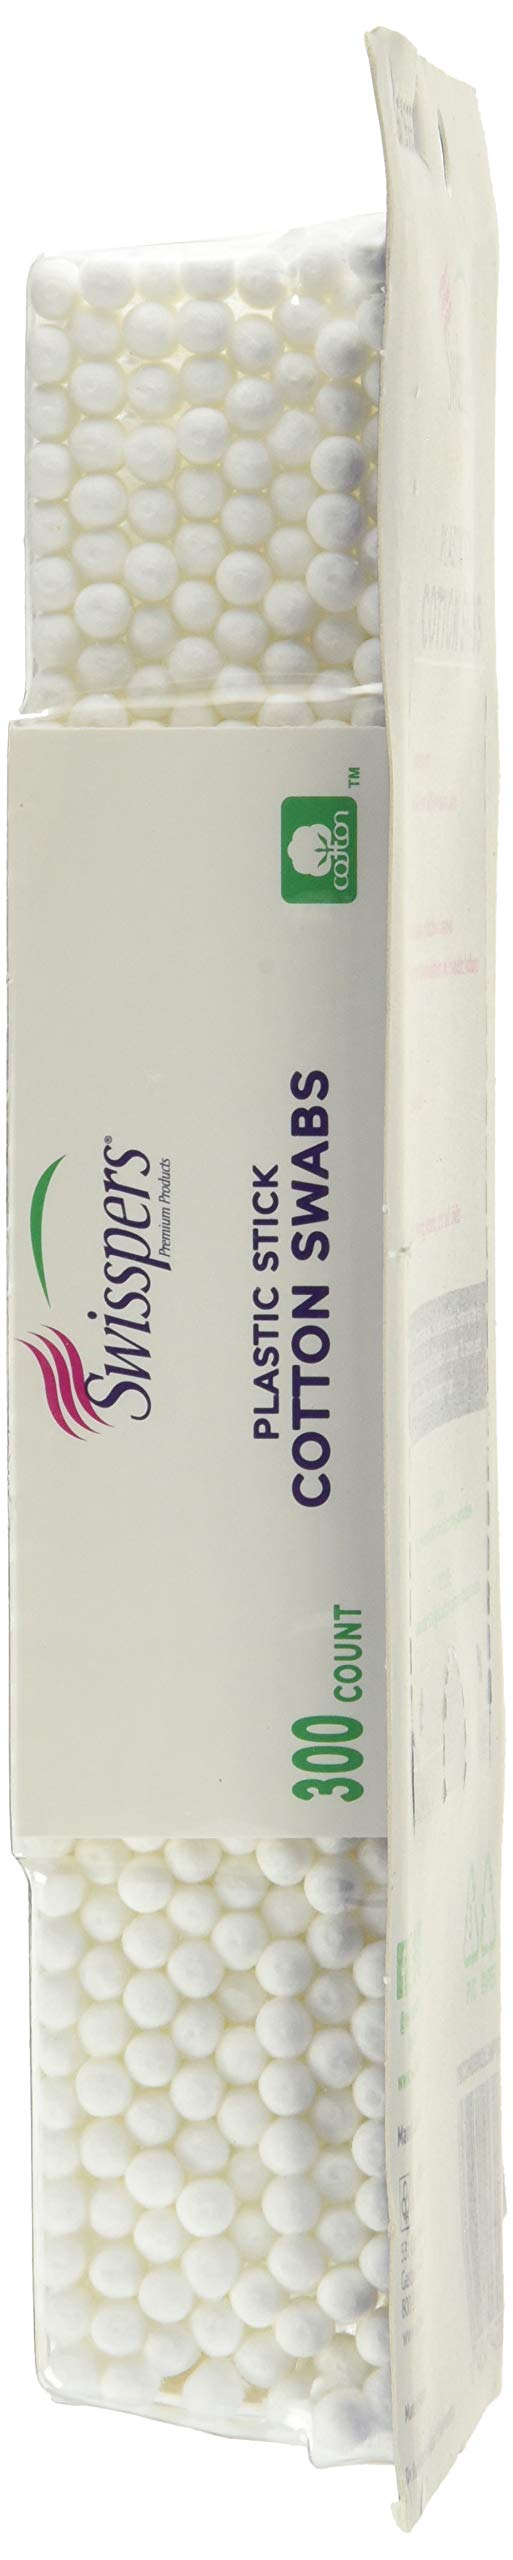 Swisspers Cotton Swabs, 100% Cotton Double-Tipped, White Plastic Sticks, 300 Count Package